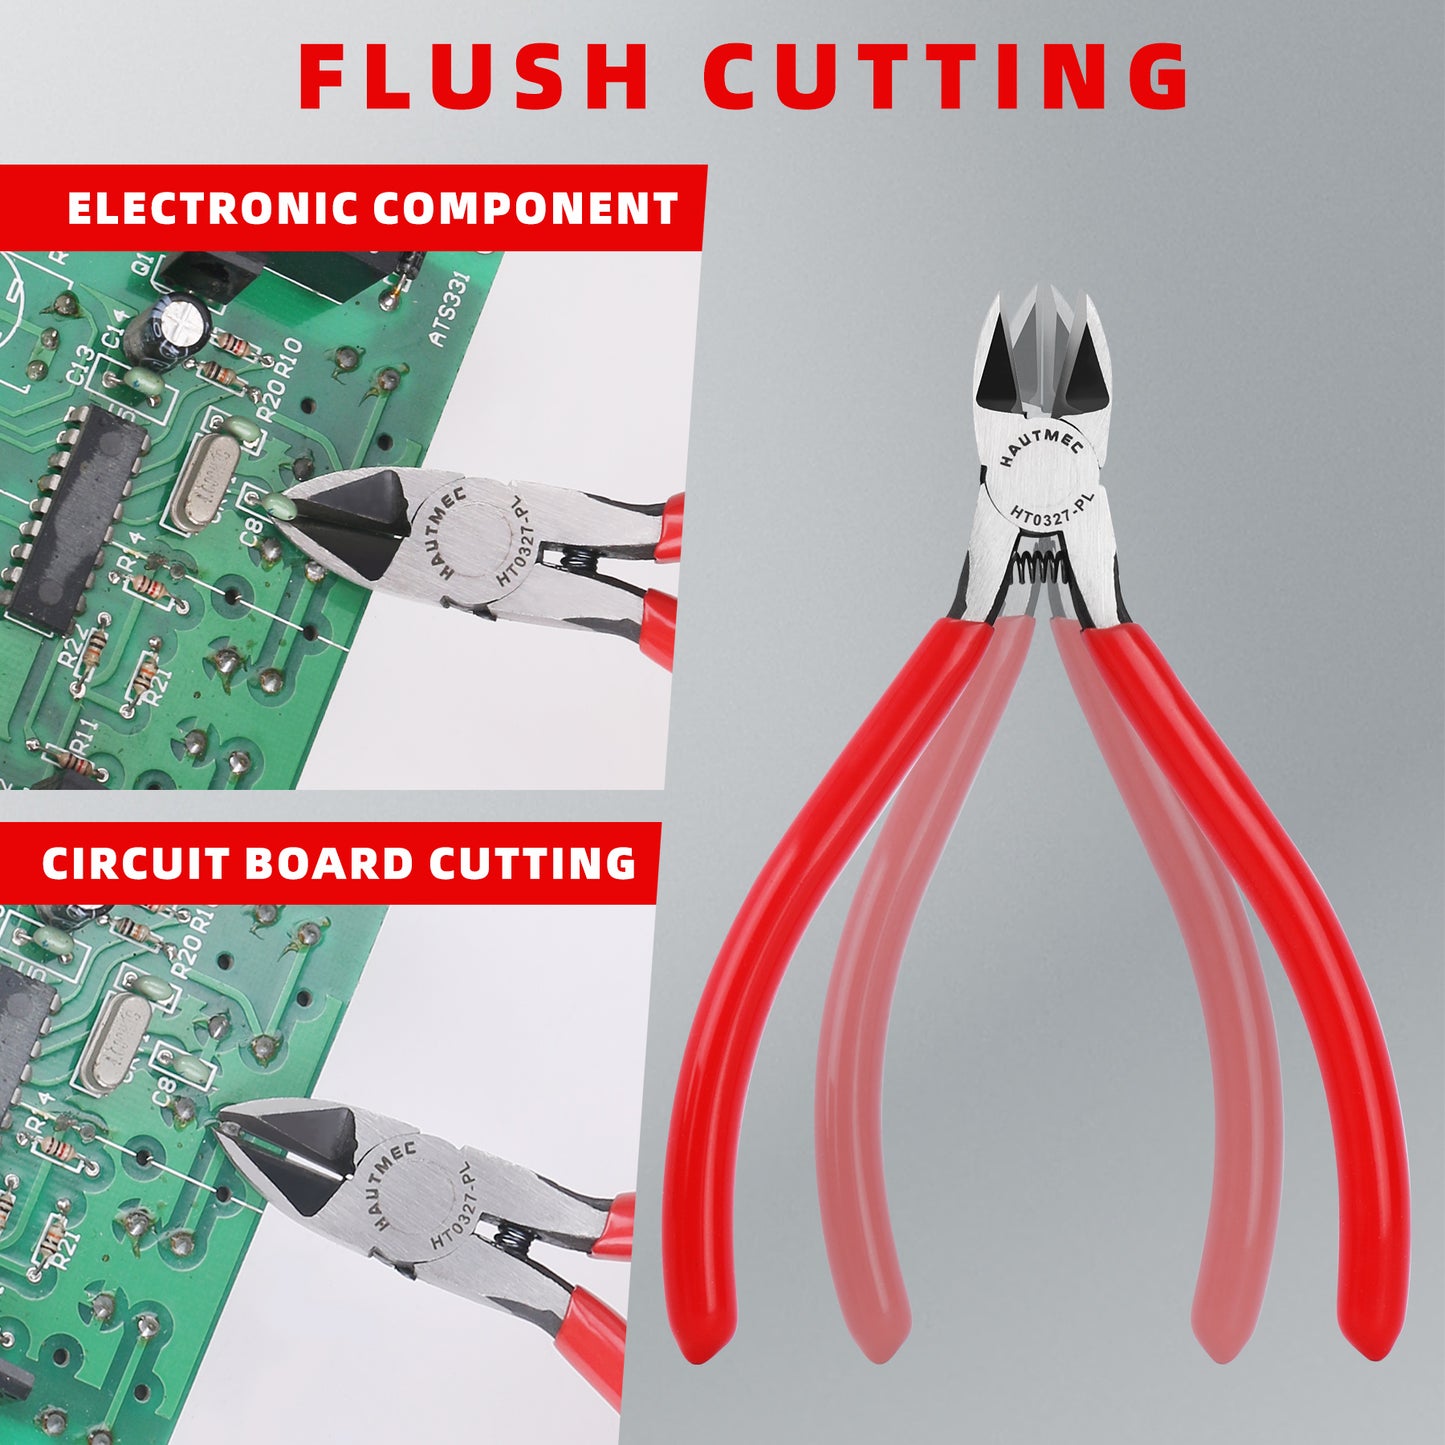 HAUTMEC 5" Precise Small Flush Cutting of Engineer Wire Cutter Plier 2PCS with Location Pin for Fine Shearing, Perfect for Circuit Board Cutting, Electronic Components, HT0327-2PC